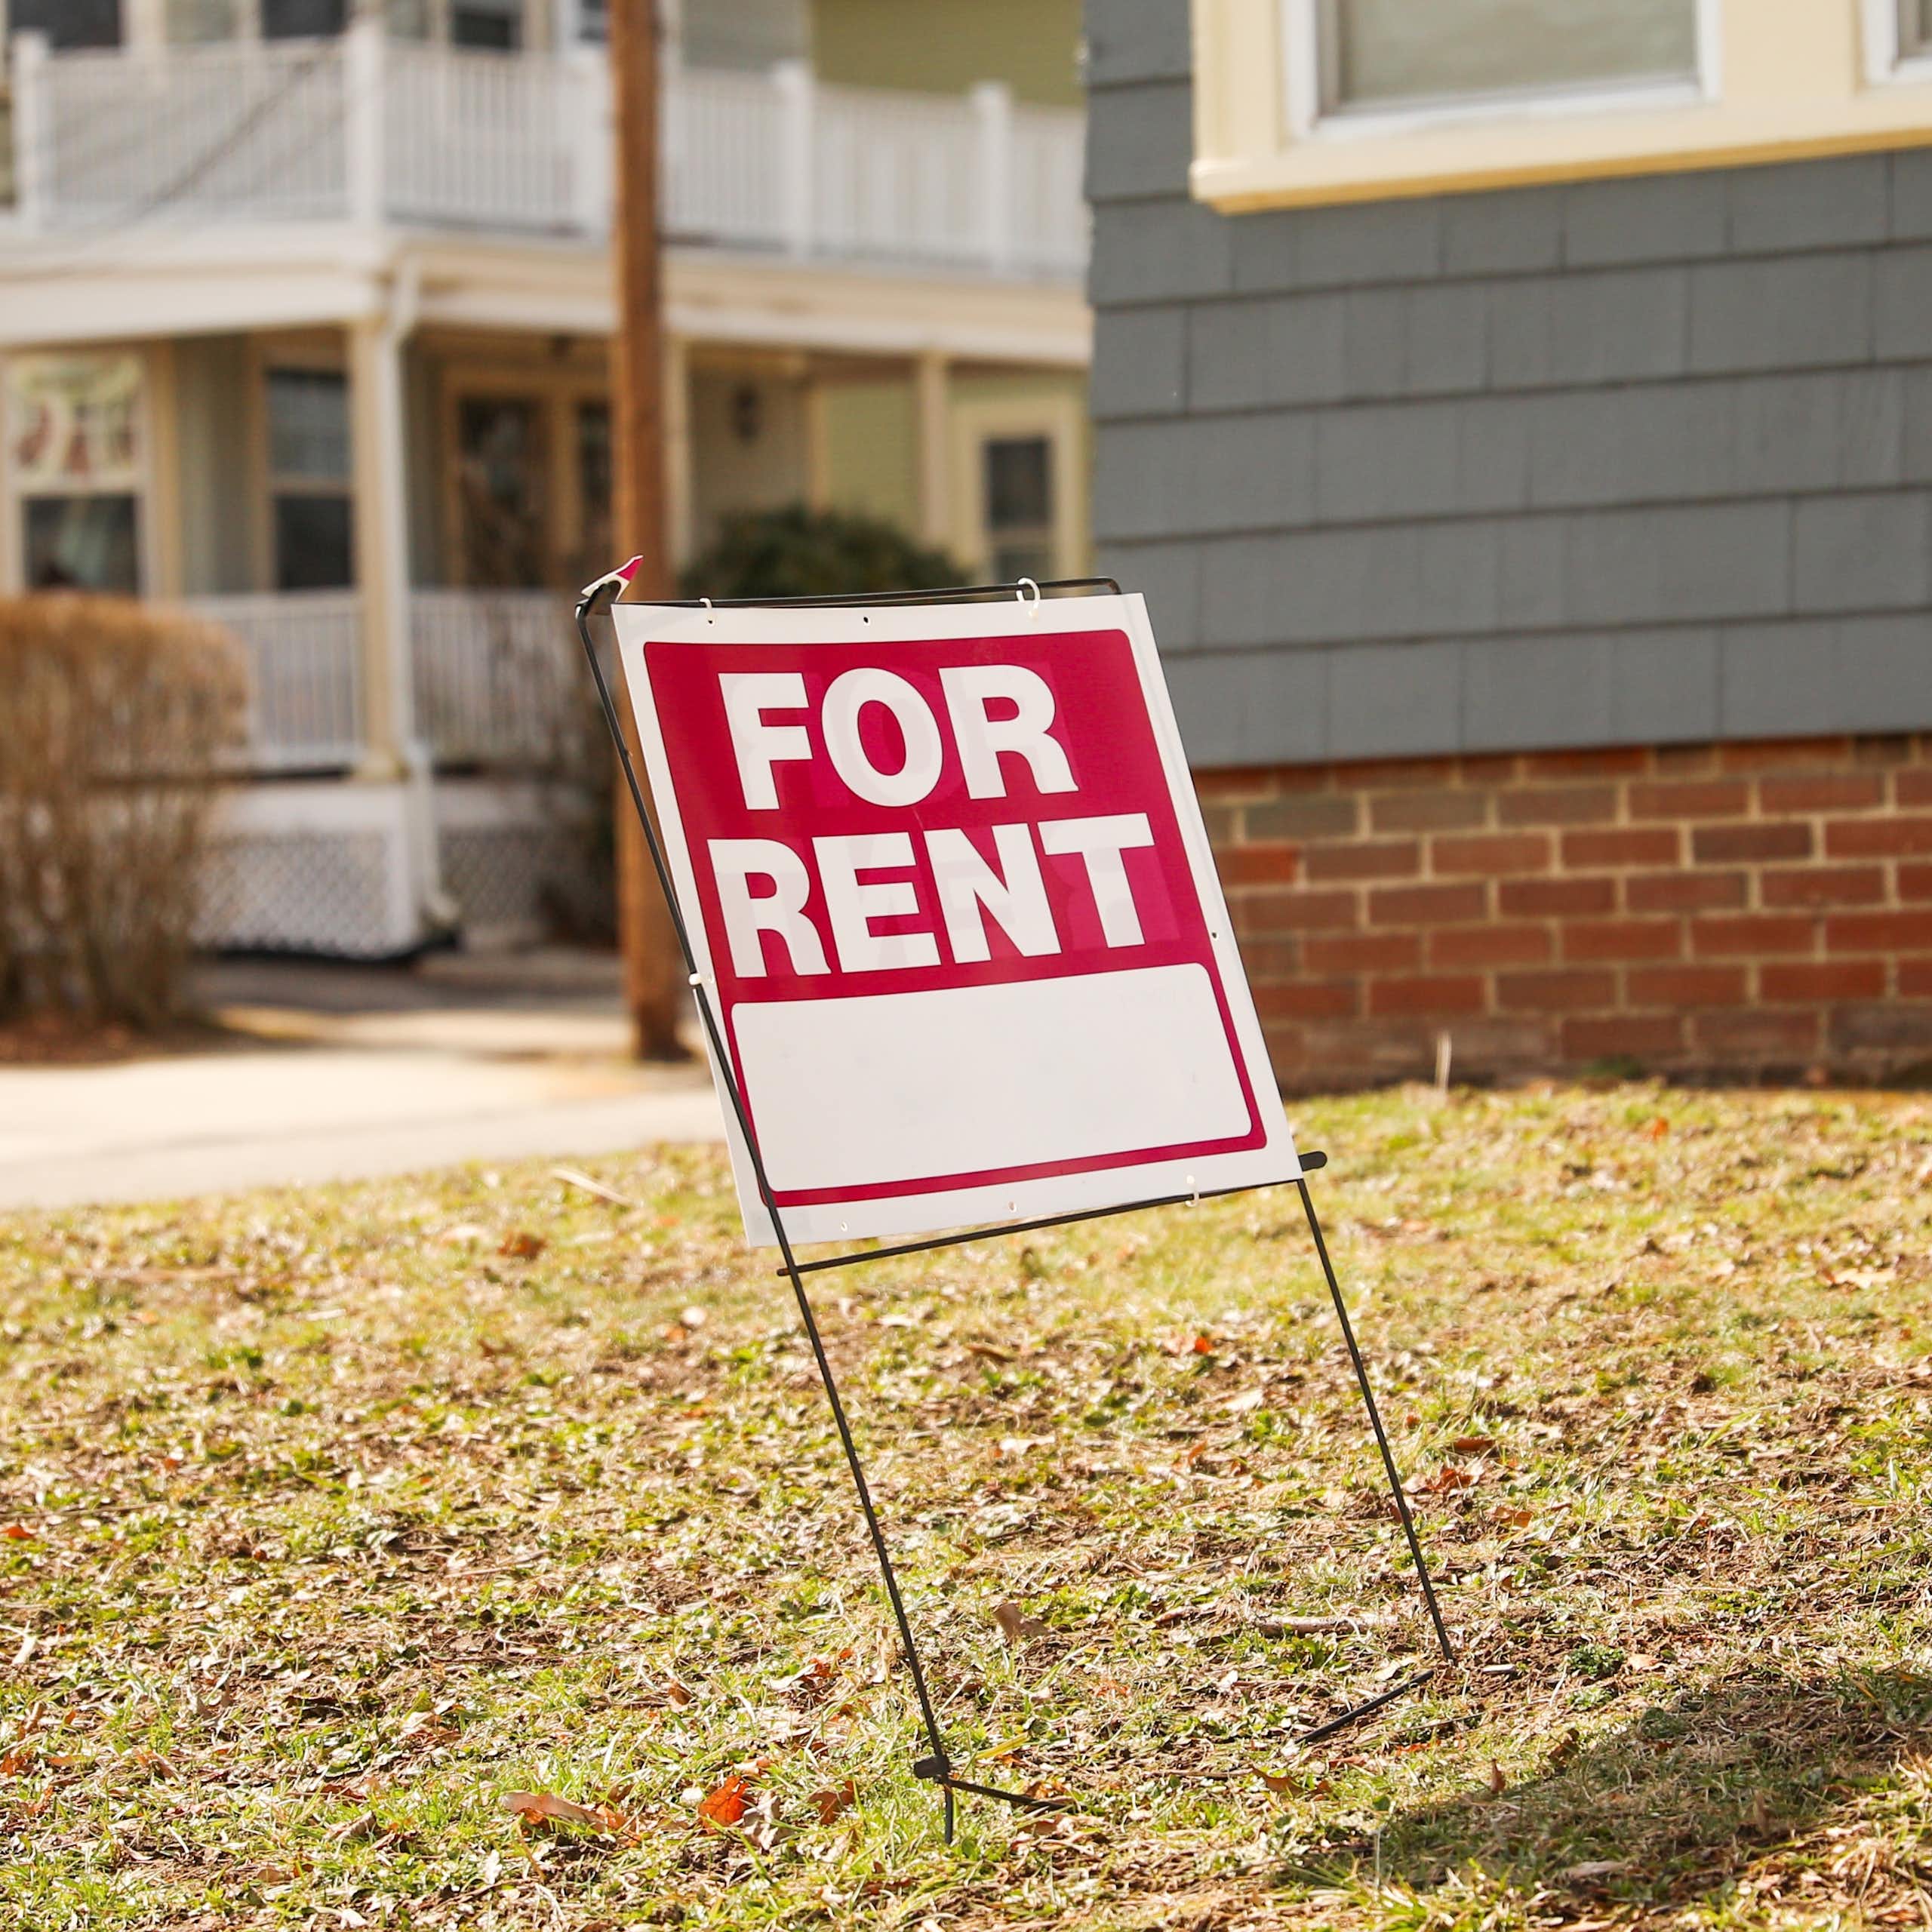 A 'for rent' sign on the front lawn of a house